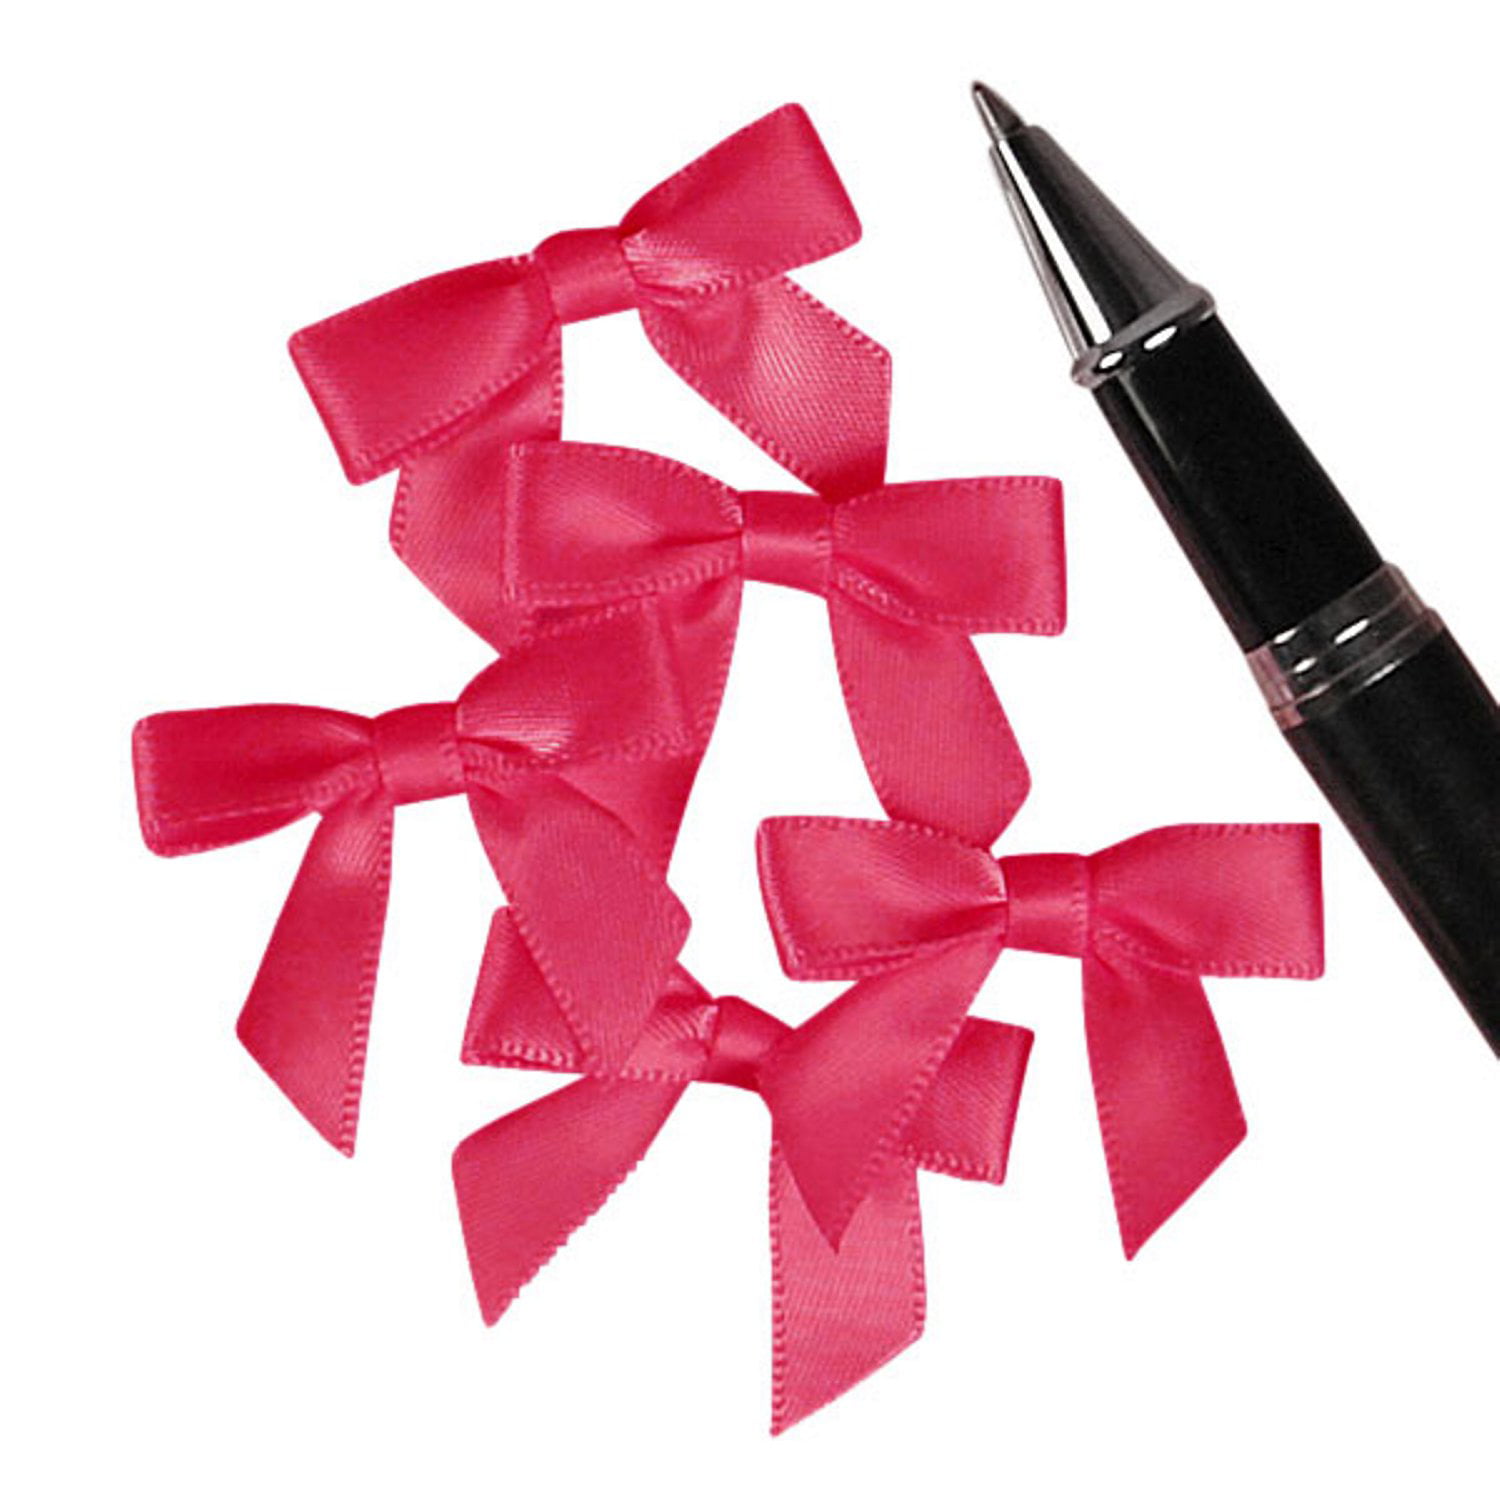 Details about   5cm Satin Bows Antique Pink Self Adhesive Pre Tied 16mm Ribbon Pack 12 FREE P&P 